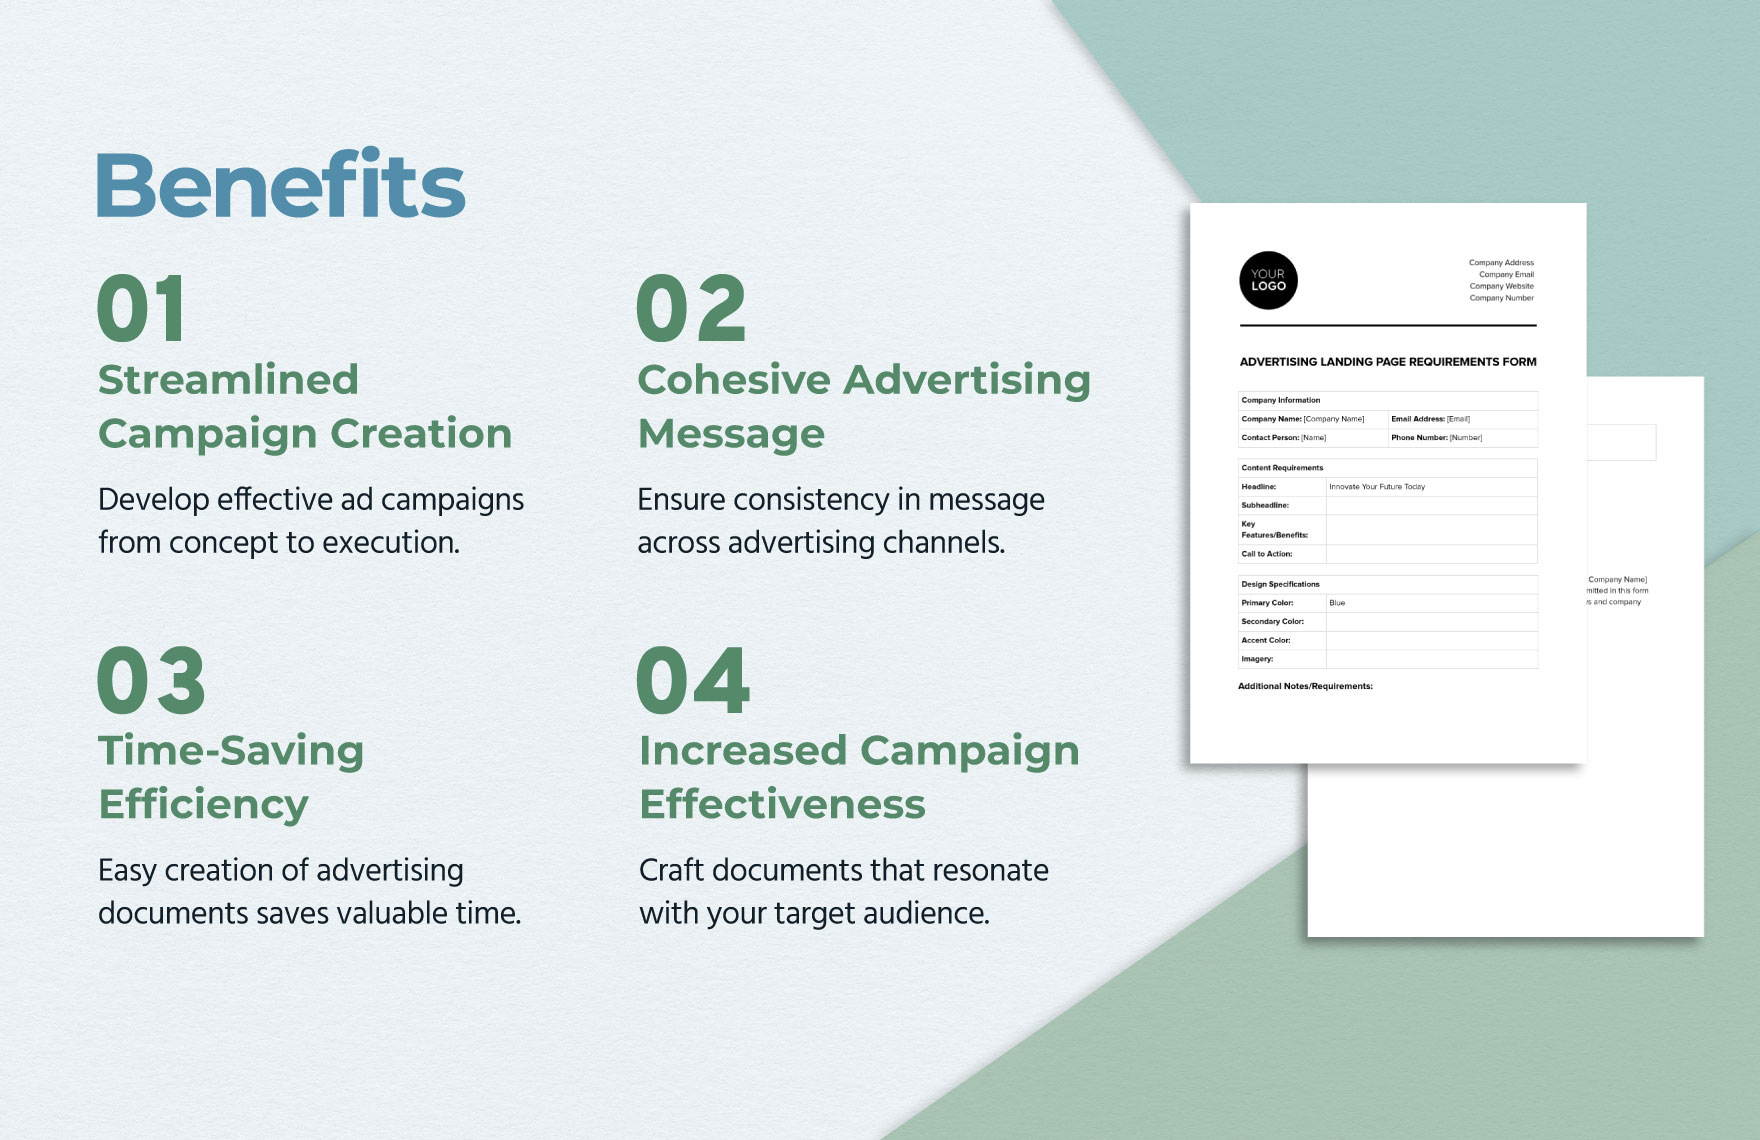 Advertising Landing Page Requirements Form Template